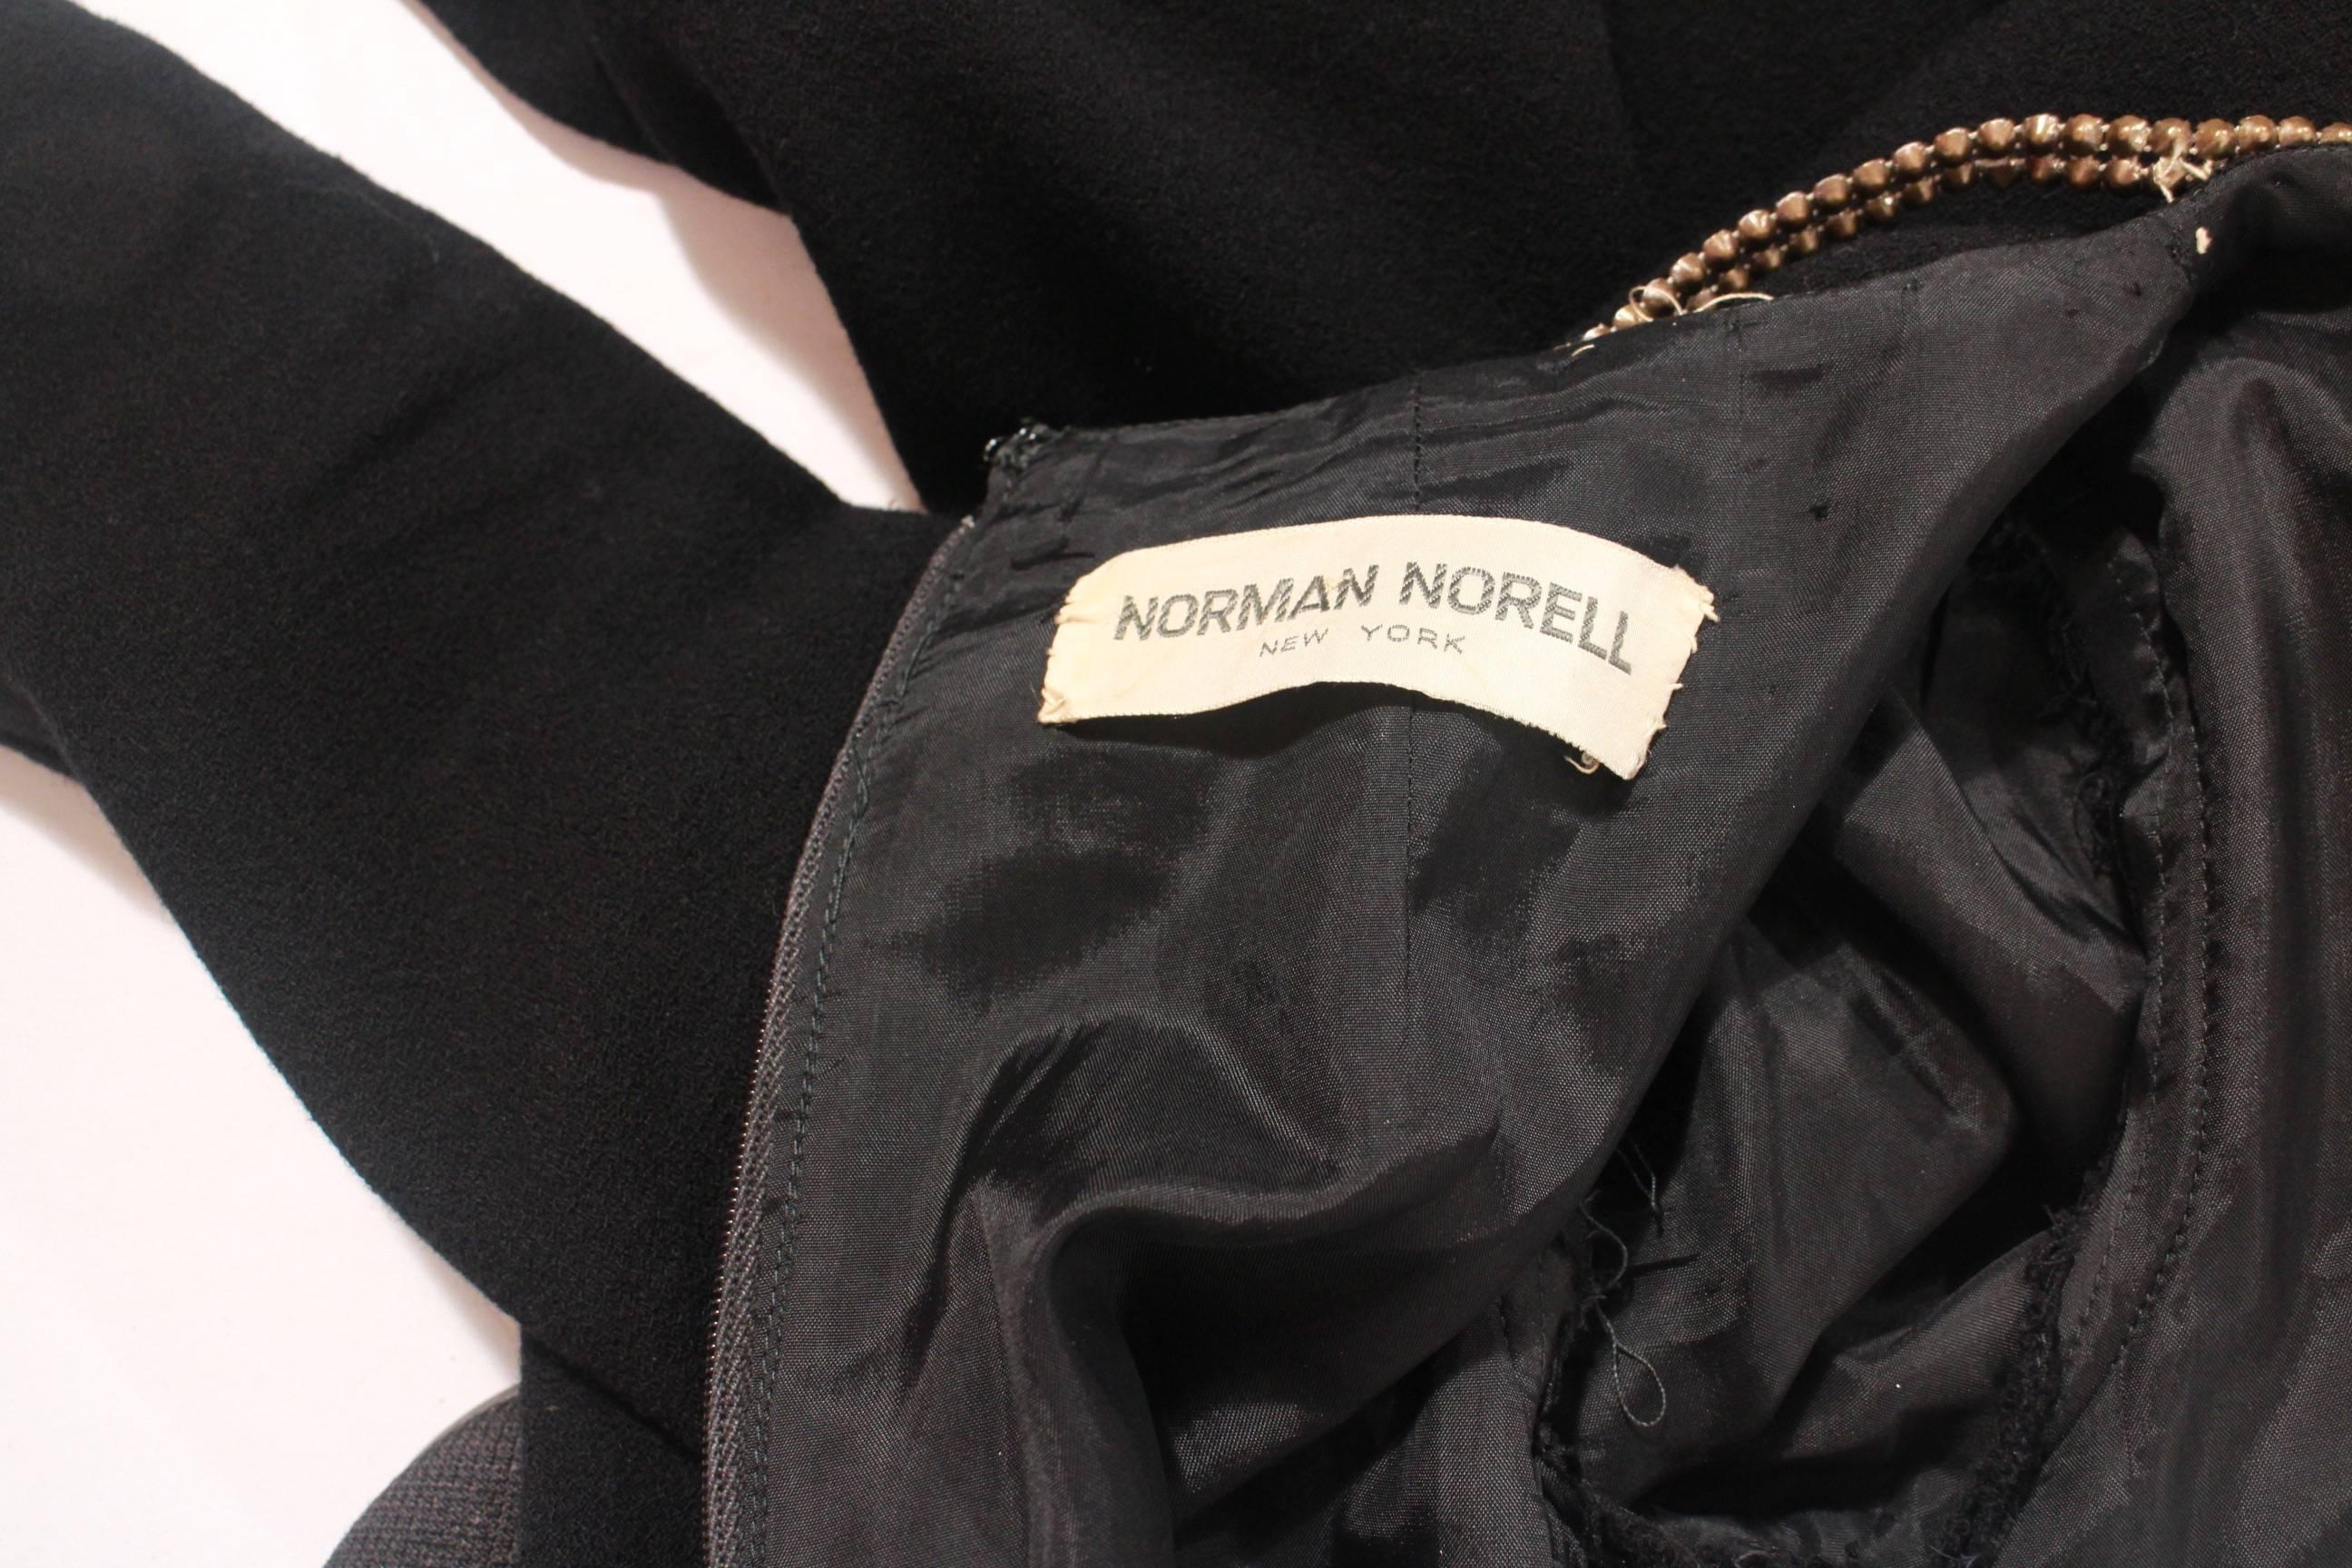 Norman Norell Black Crepe Dress with Rhinestones In Excellent Condition For Sale In New York, NY